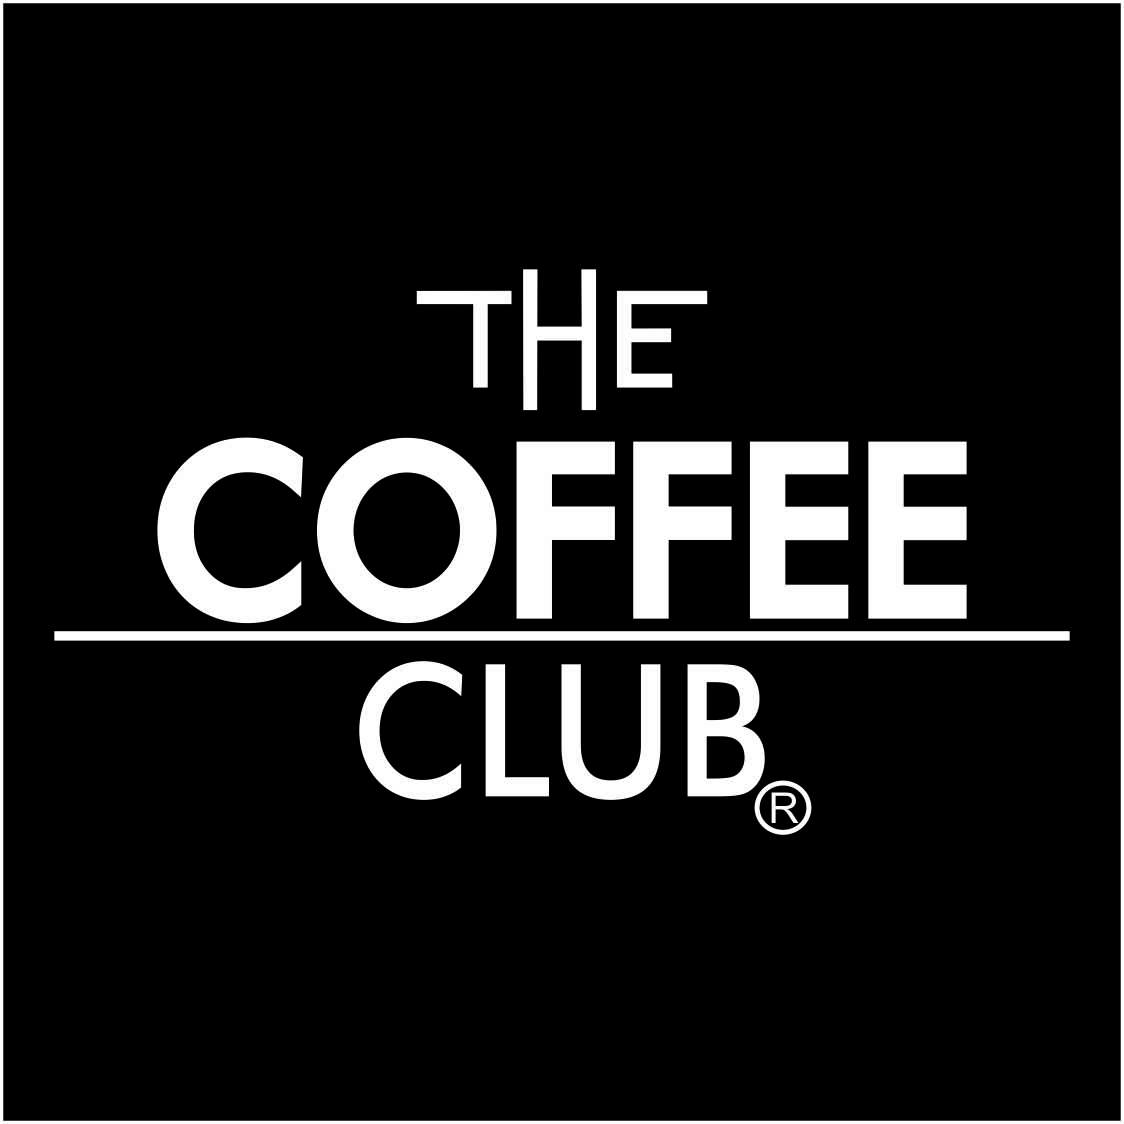 United Arab Emirates The Coffee Club Opens For The First Time In Uae Comunicaffe International